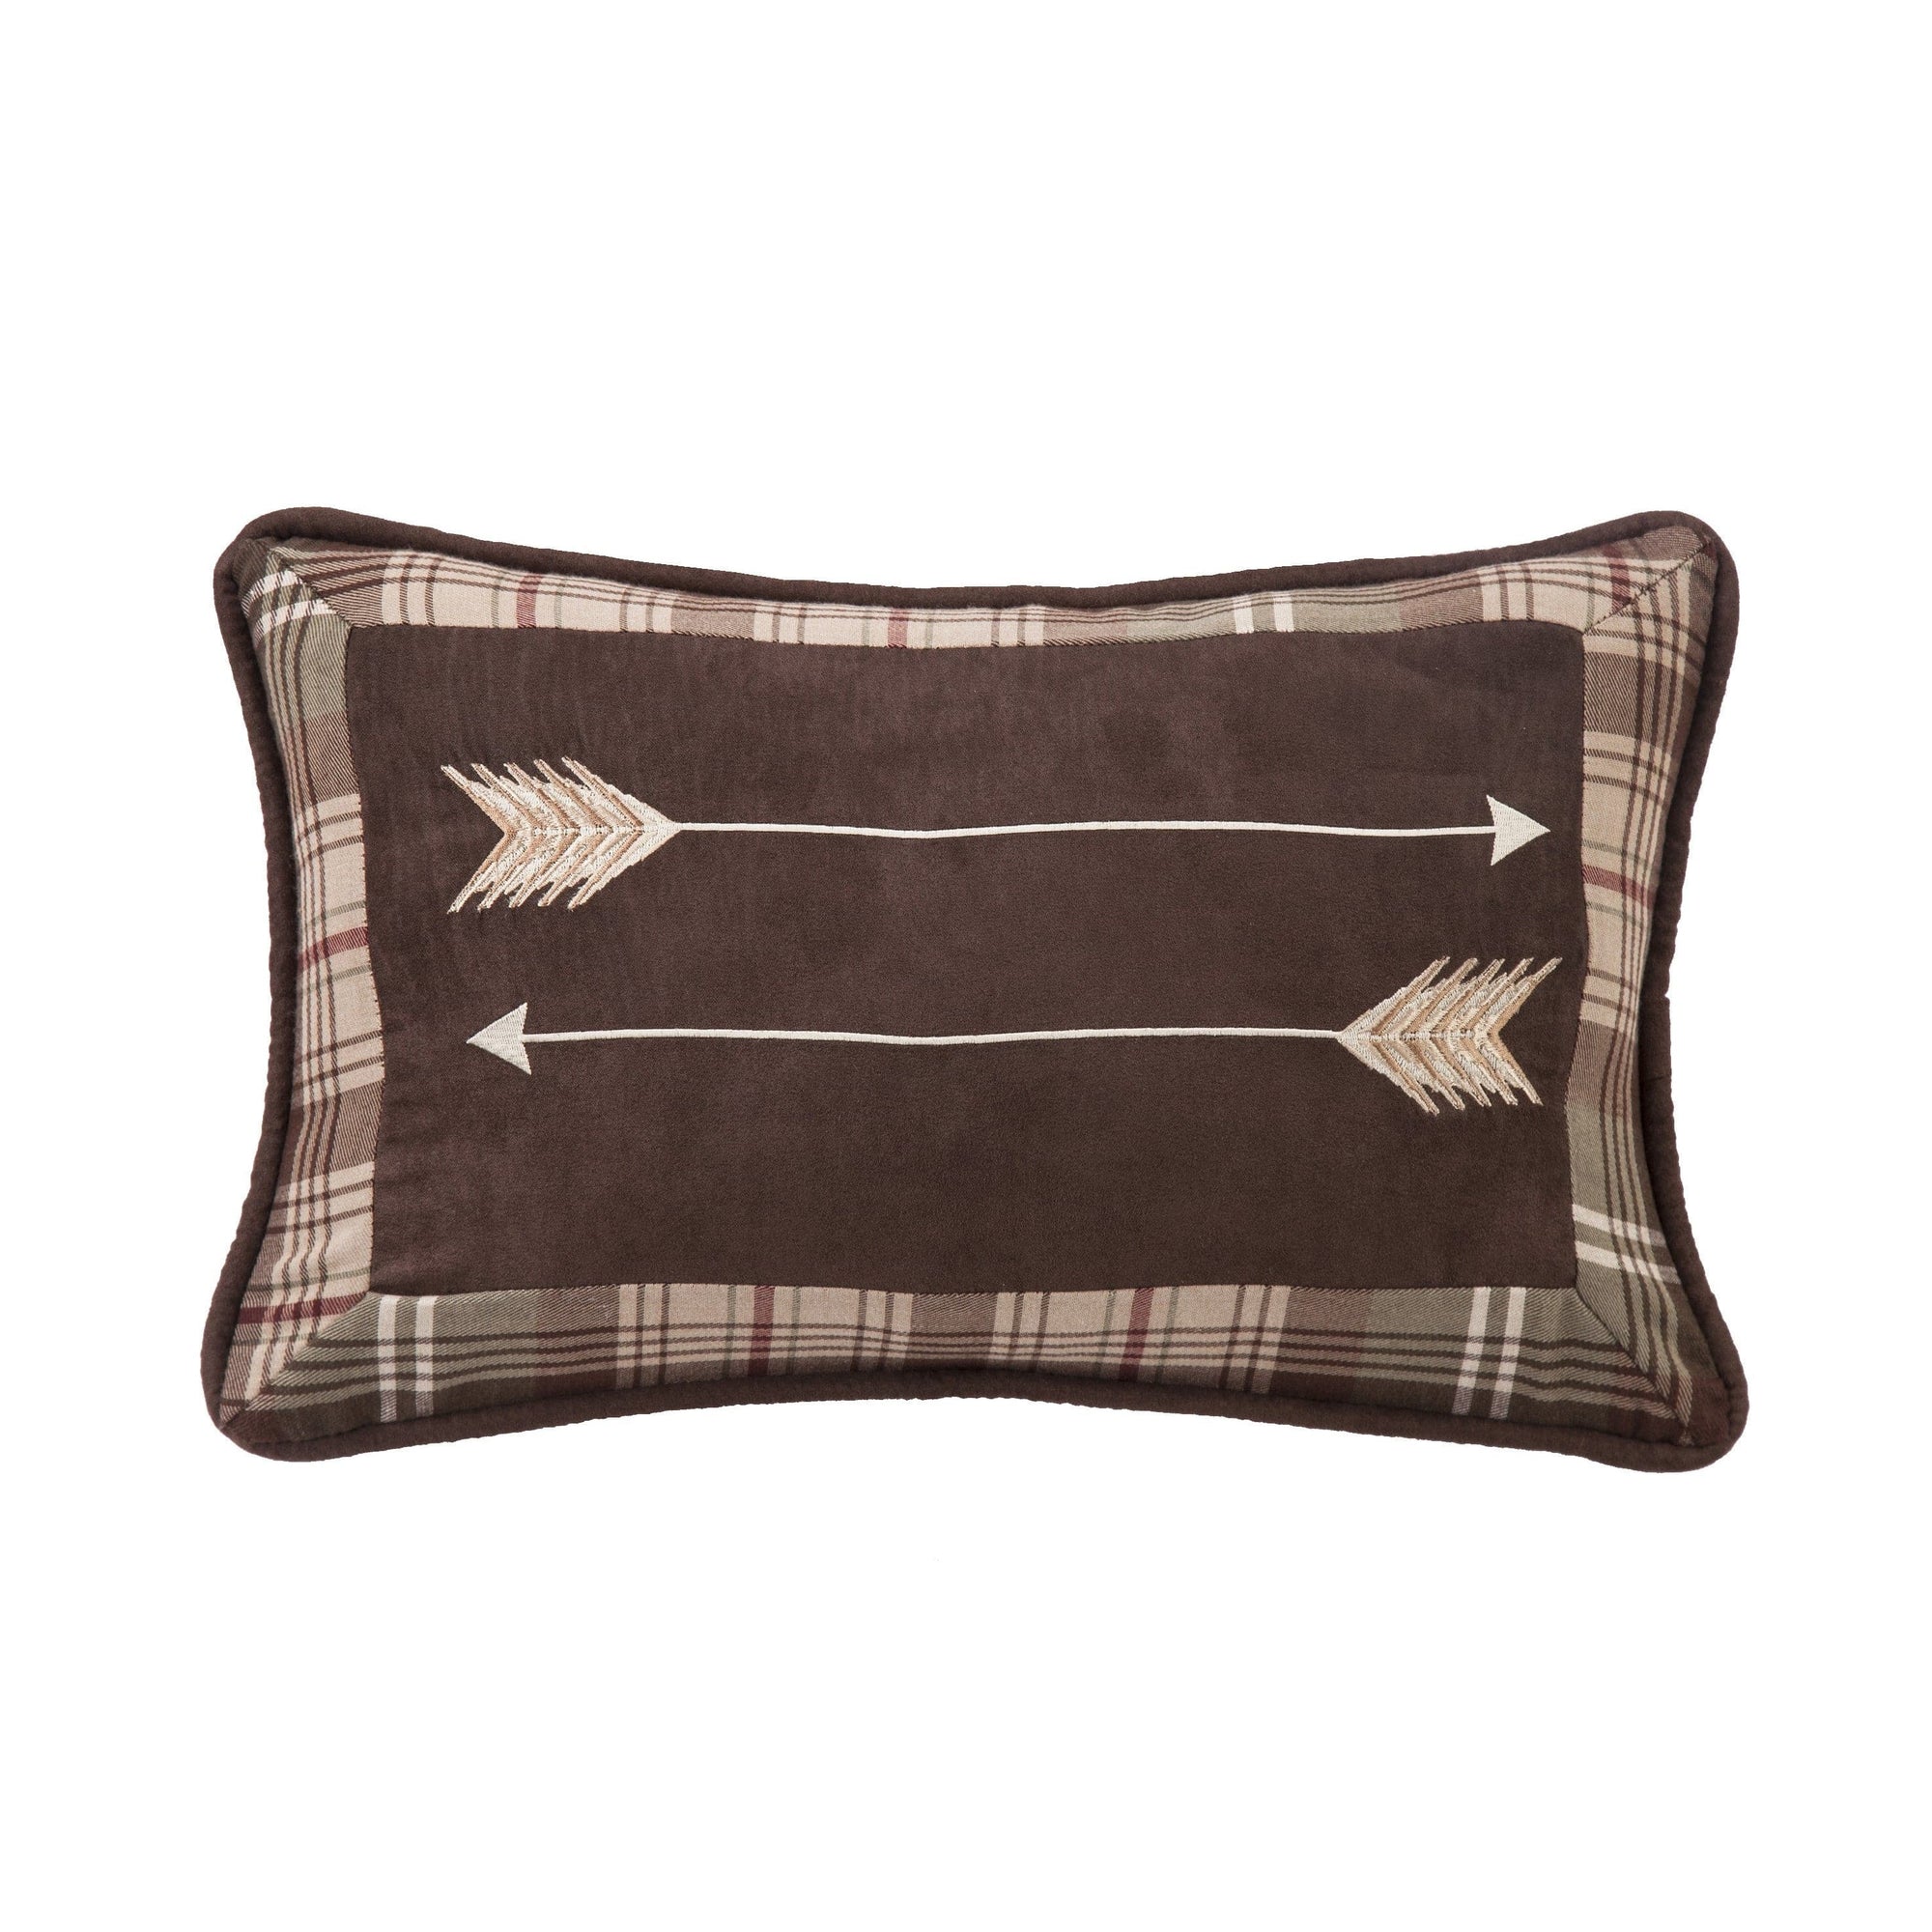 Huntsman Embroidered Arrow Accent Pillow, 12x19 Pillow